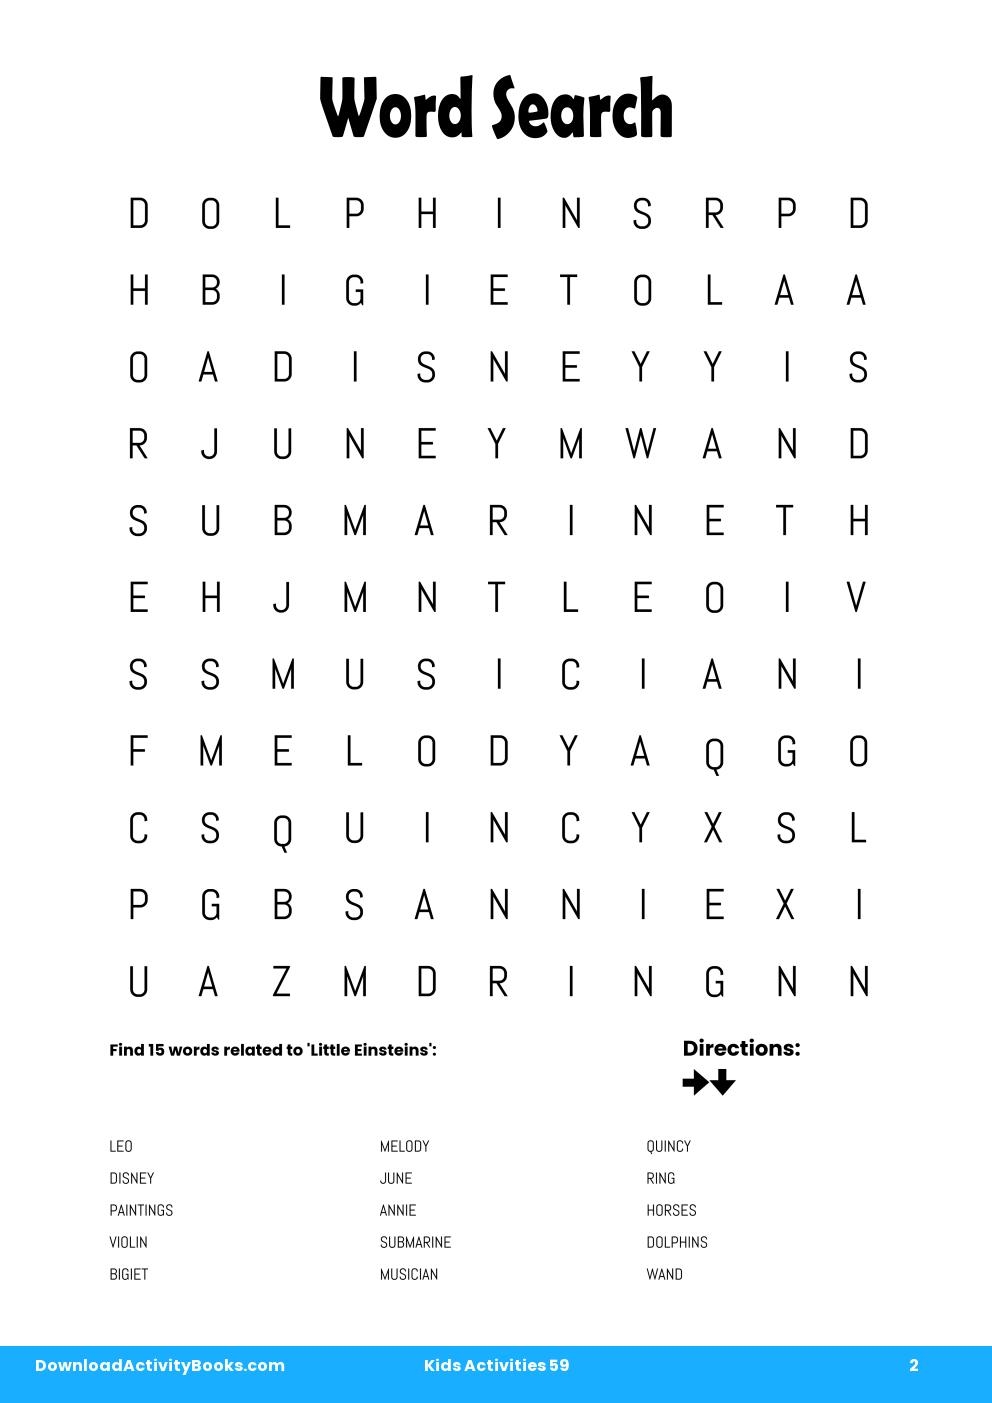 Word Search in Kids Activities 59